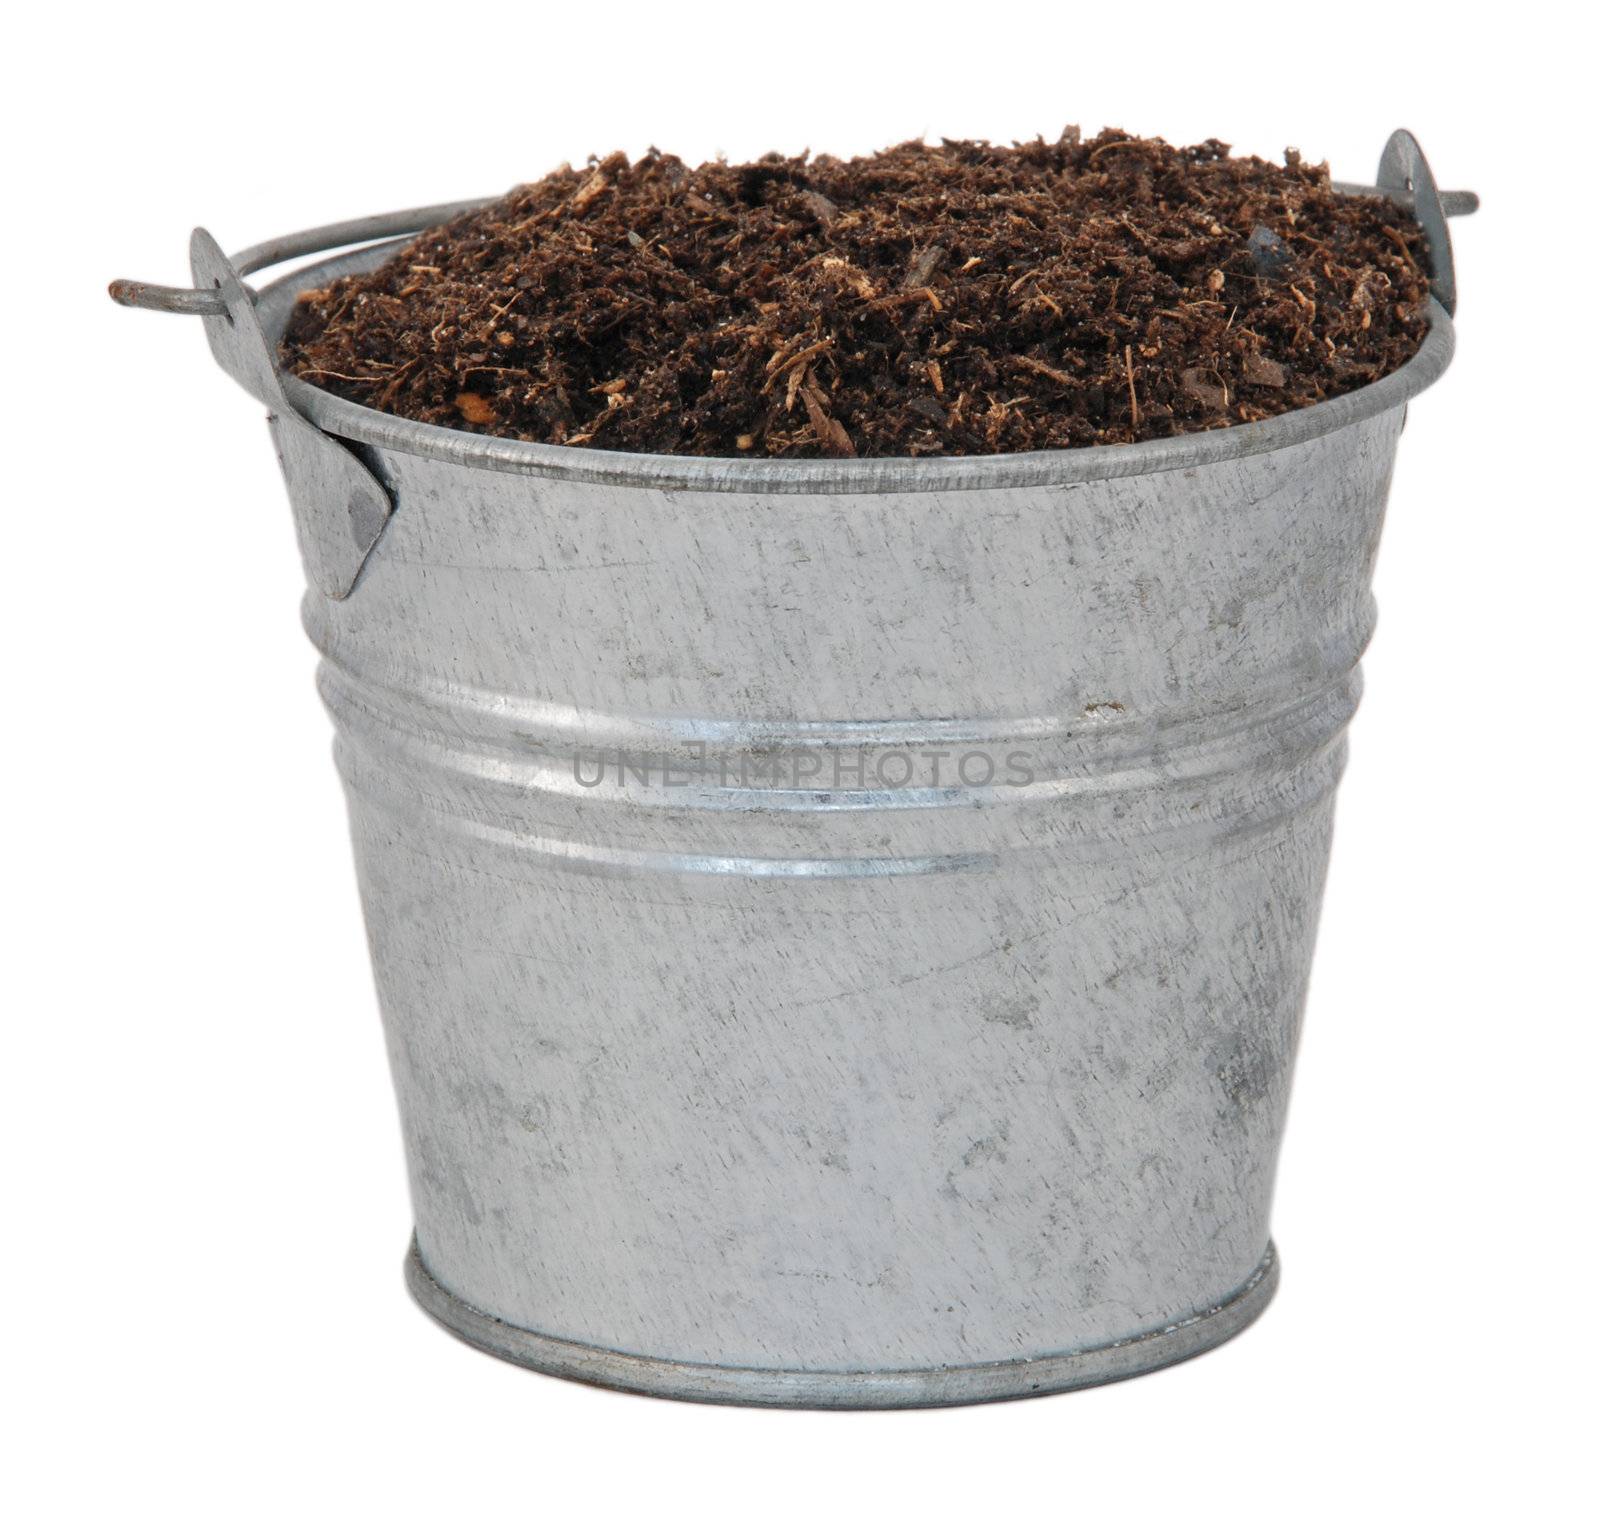 Compost / soil / dirt in a miniature metal bucket, isolated on a white background